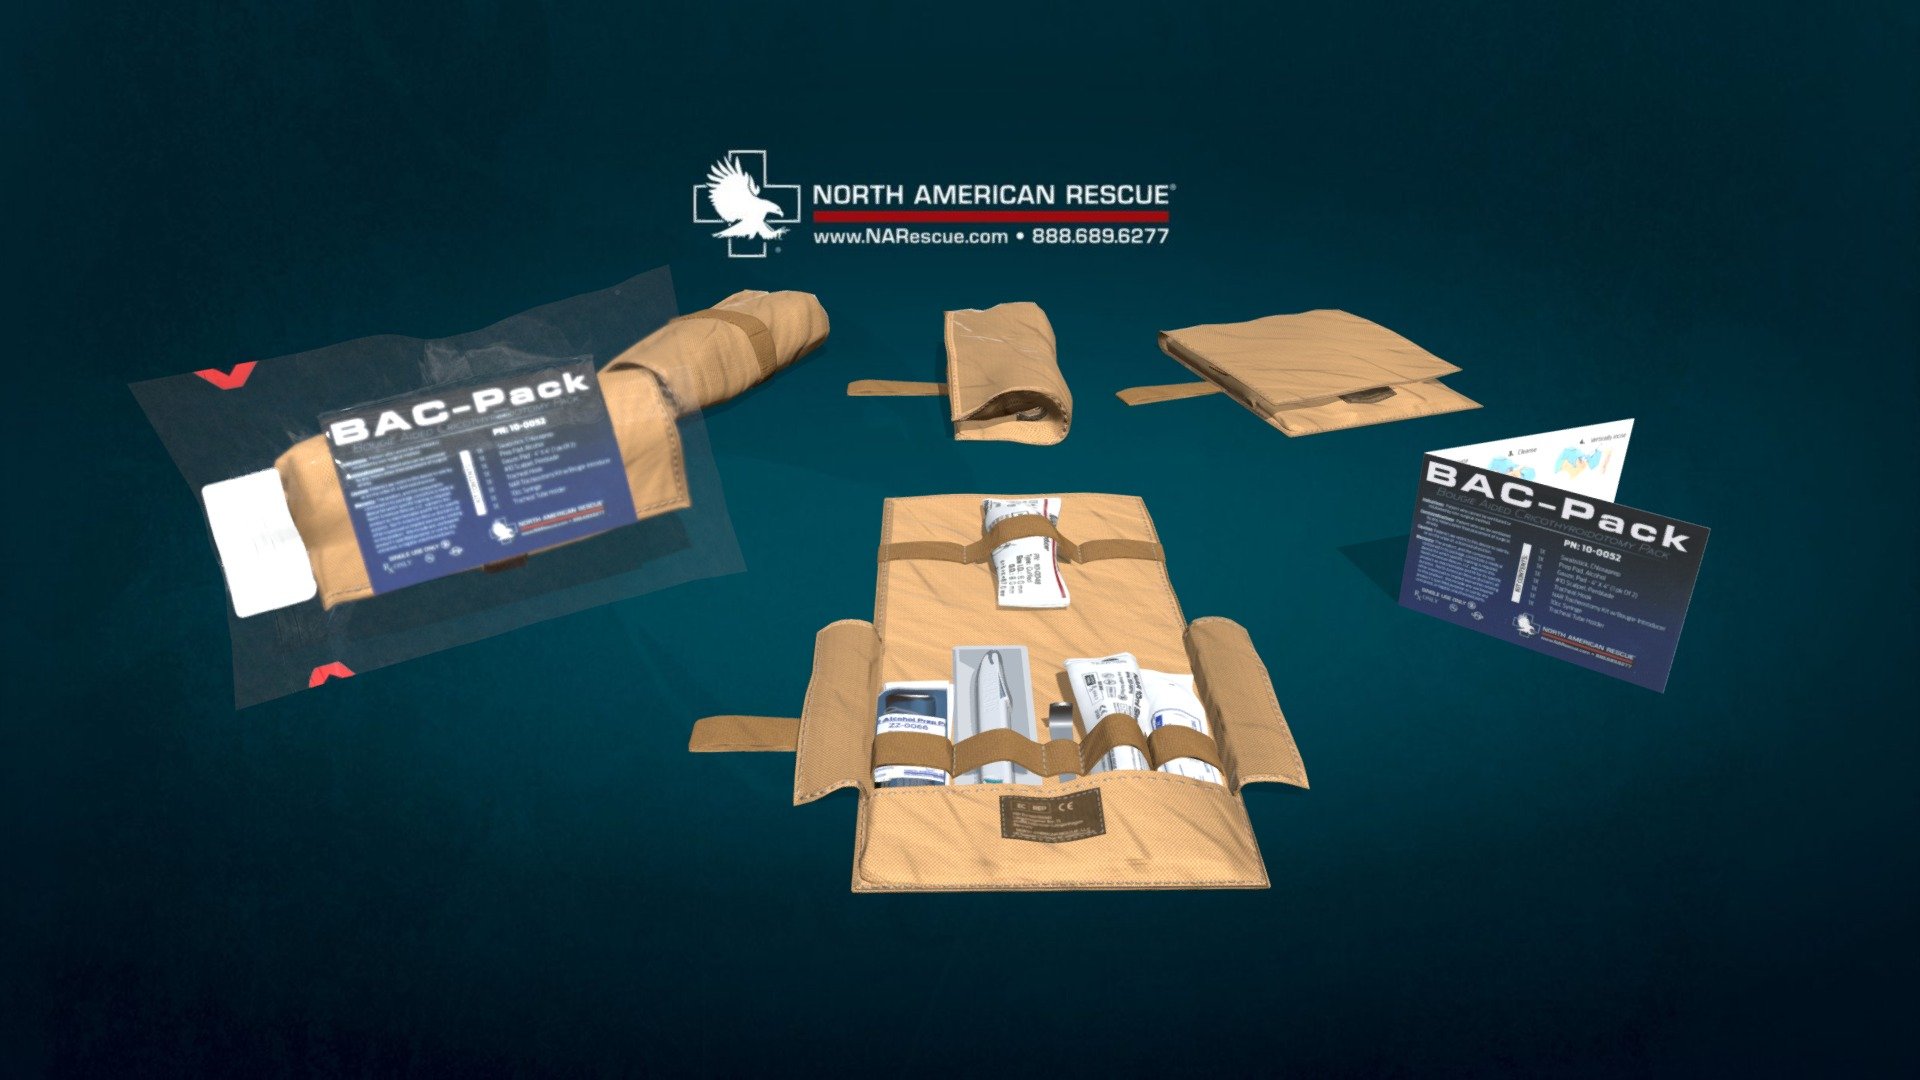 https://www.narescue.com/bac-pack-bougie-aided-cricothyroidotomy-pack.html

The North American Rescue Bougie-Aided Cricothyroidotomy Pack (BAC-Pack™) is a comprehensive solution that allows the user to perform a surgical cricothyroidotomy in any environment. With the components arranged by order of use and organized with elastic loops, the BAC-Pack™ is an easy-to-use kit in a small pouch made of durable 500D nylon 3d model